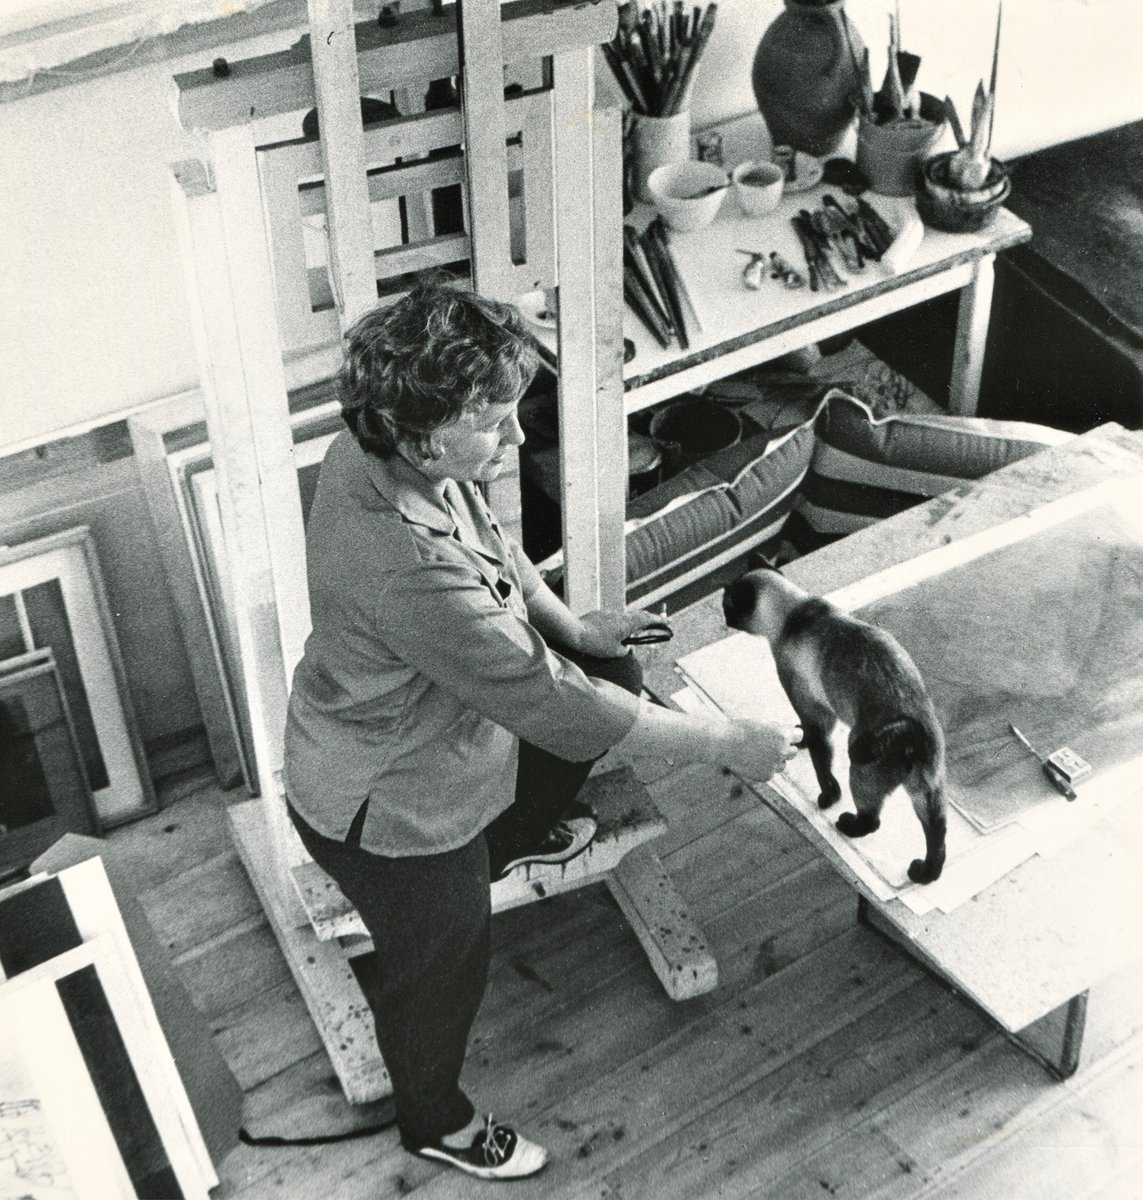 Seasonal best wishes to one and all!!

Here we add to our irregular 'artist and her cat' series with Barns-Graham captured in 1964 by photographer Peter Kinnear, in her then relatively new Barnaloft studio on Porthmeor Beach in St Ives.
  
#wilhelminabarnsgraham